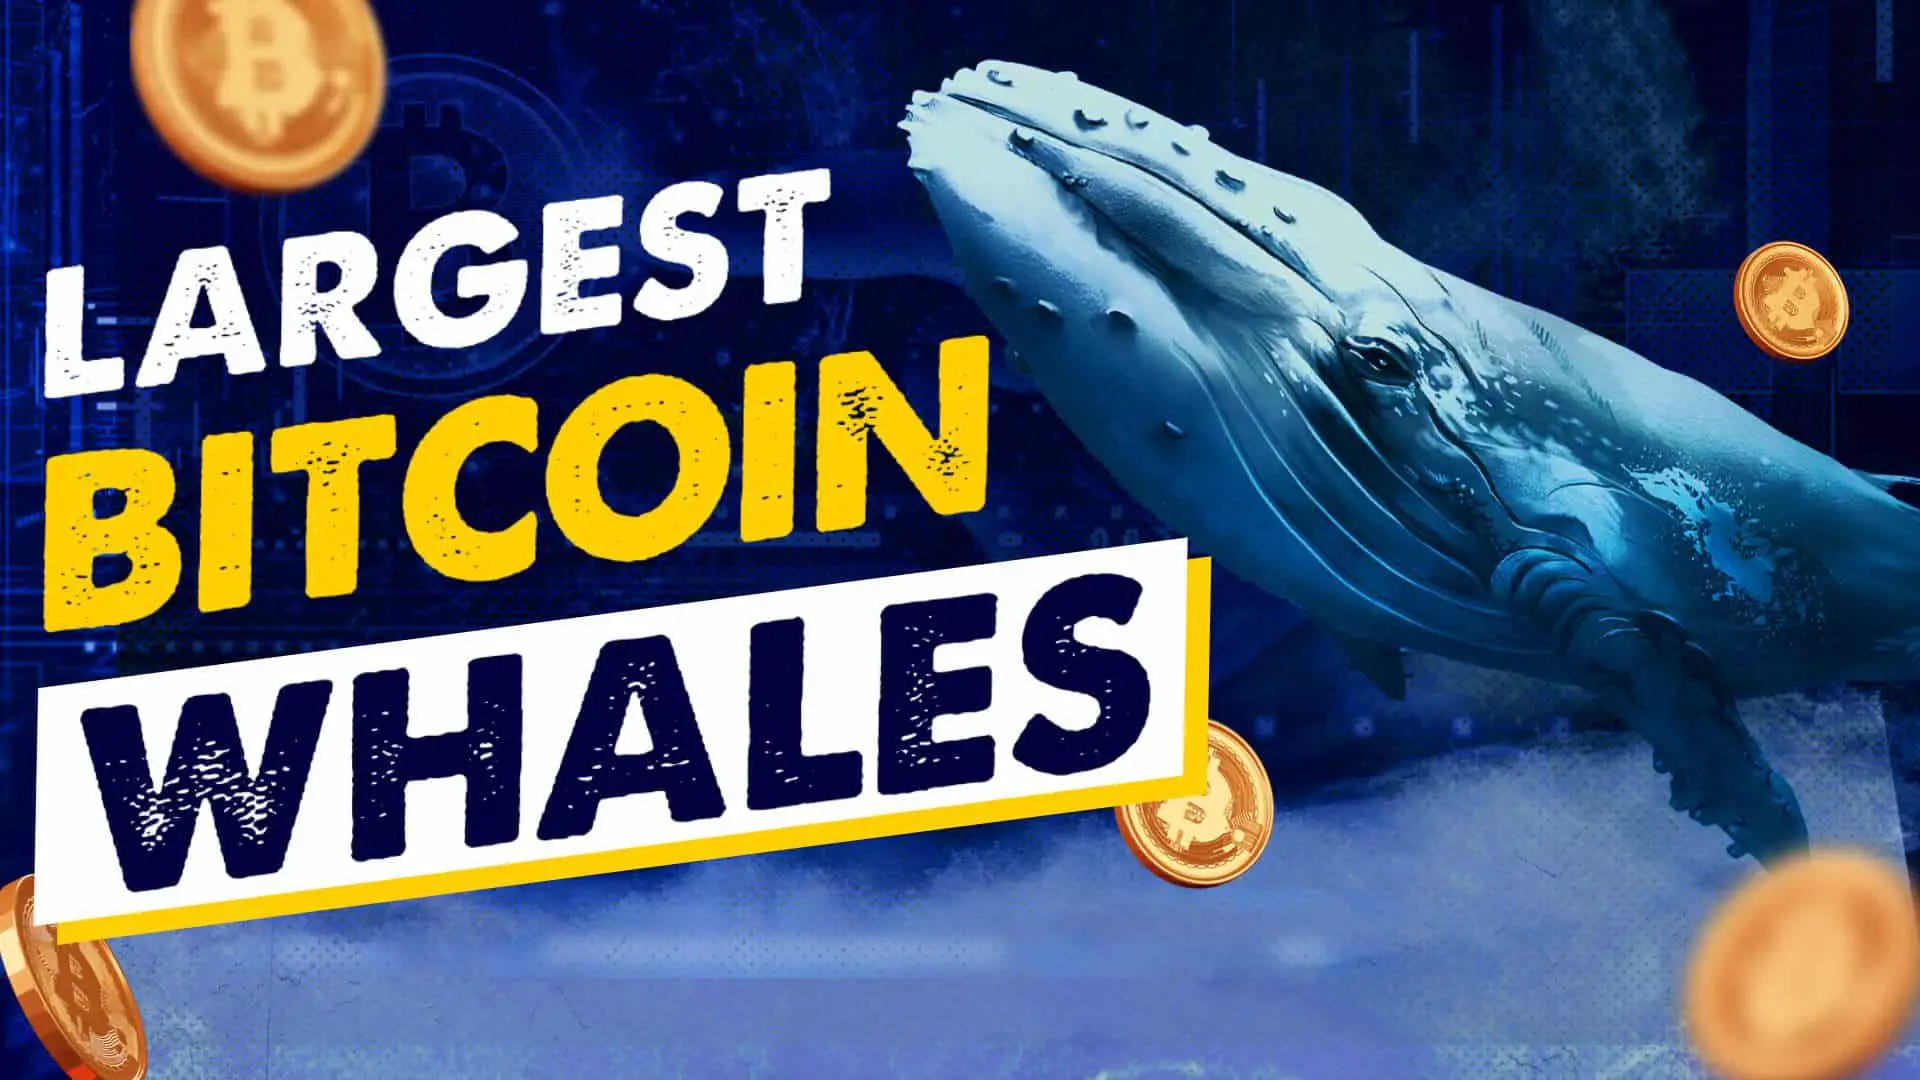 Who are the Biggest Bitcoin Whales?